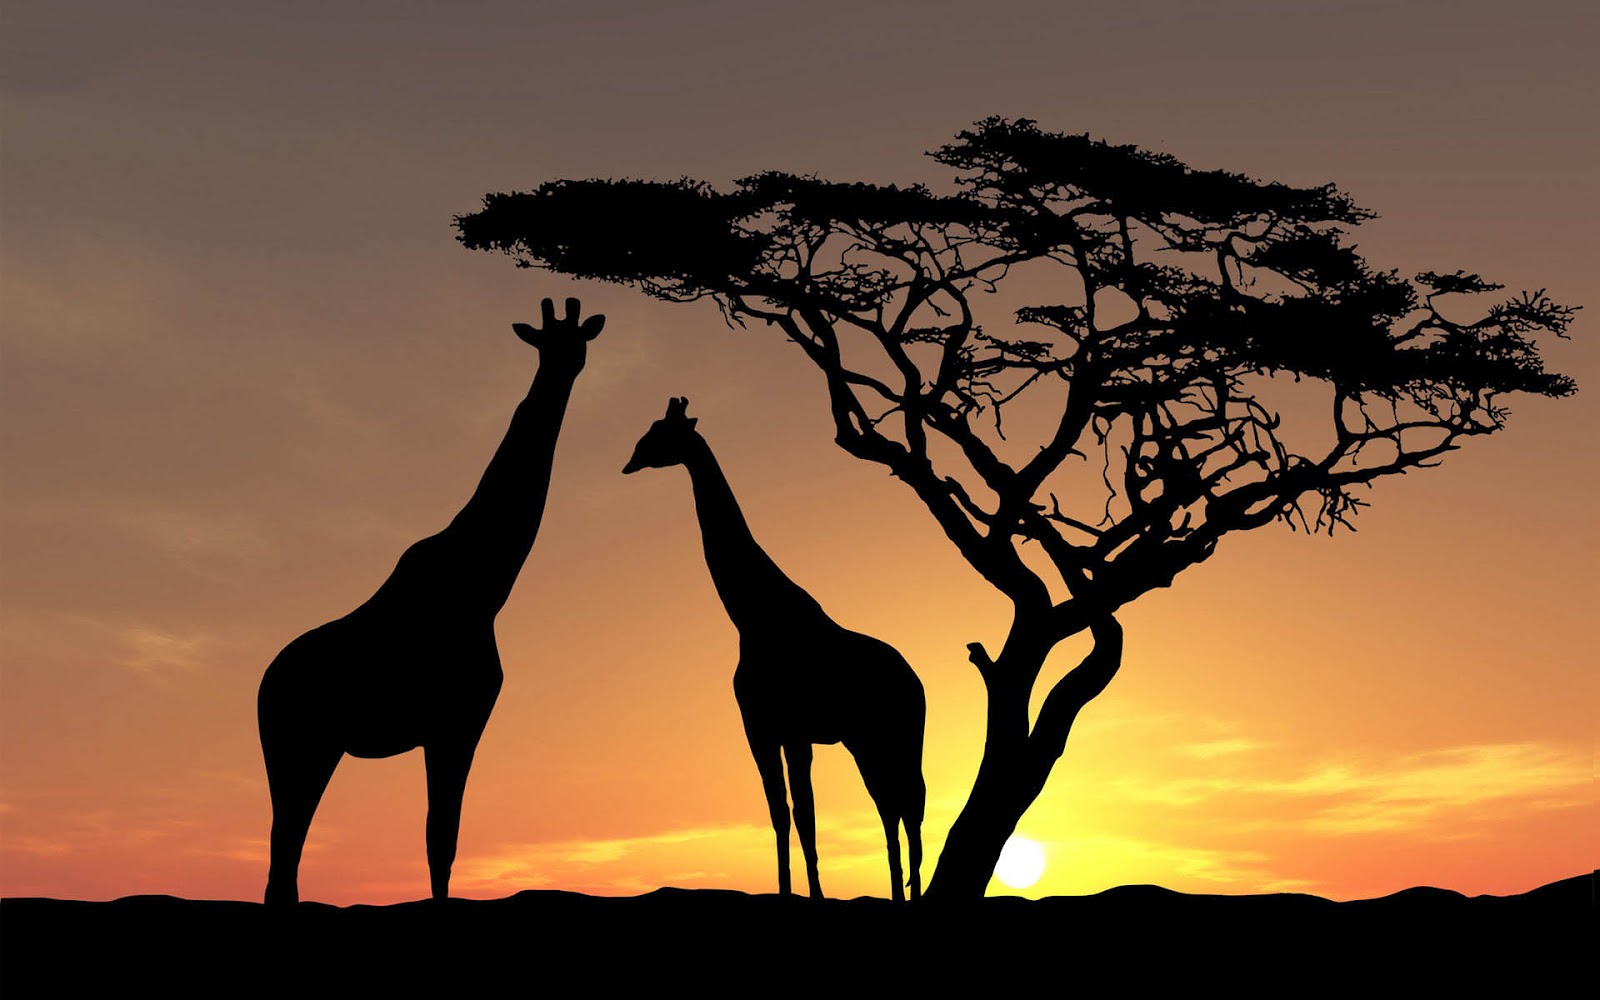 Collection Of Giraffe Iphone Wallpaper On Hdwallpapers - African Landscape With Animals - HD Wallpaper 